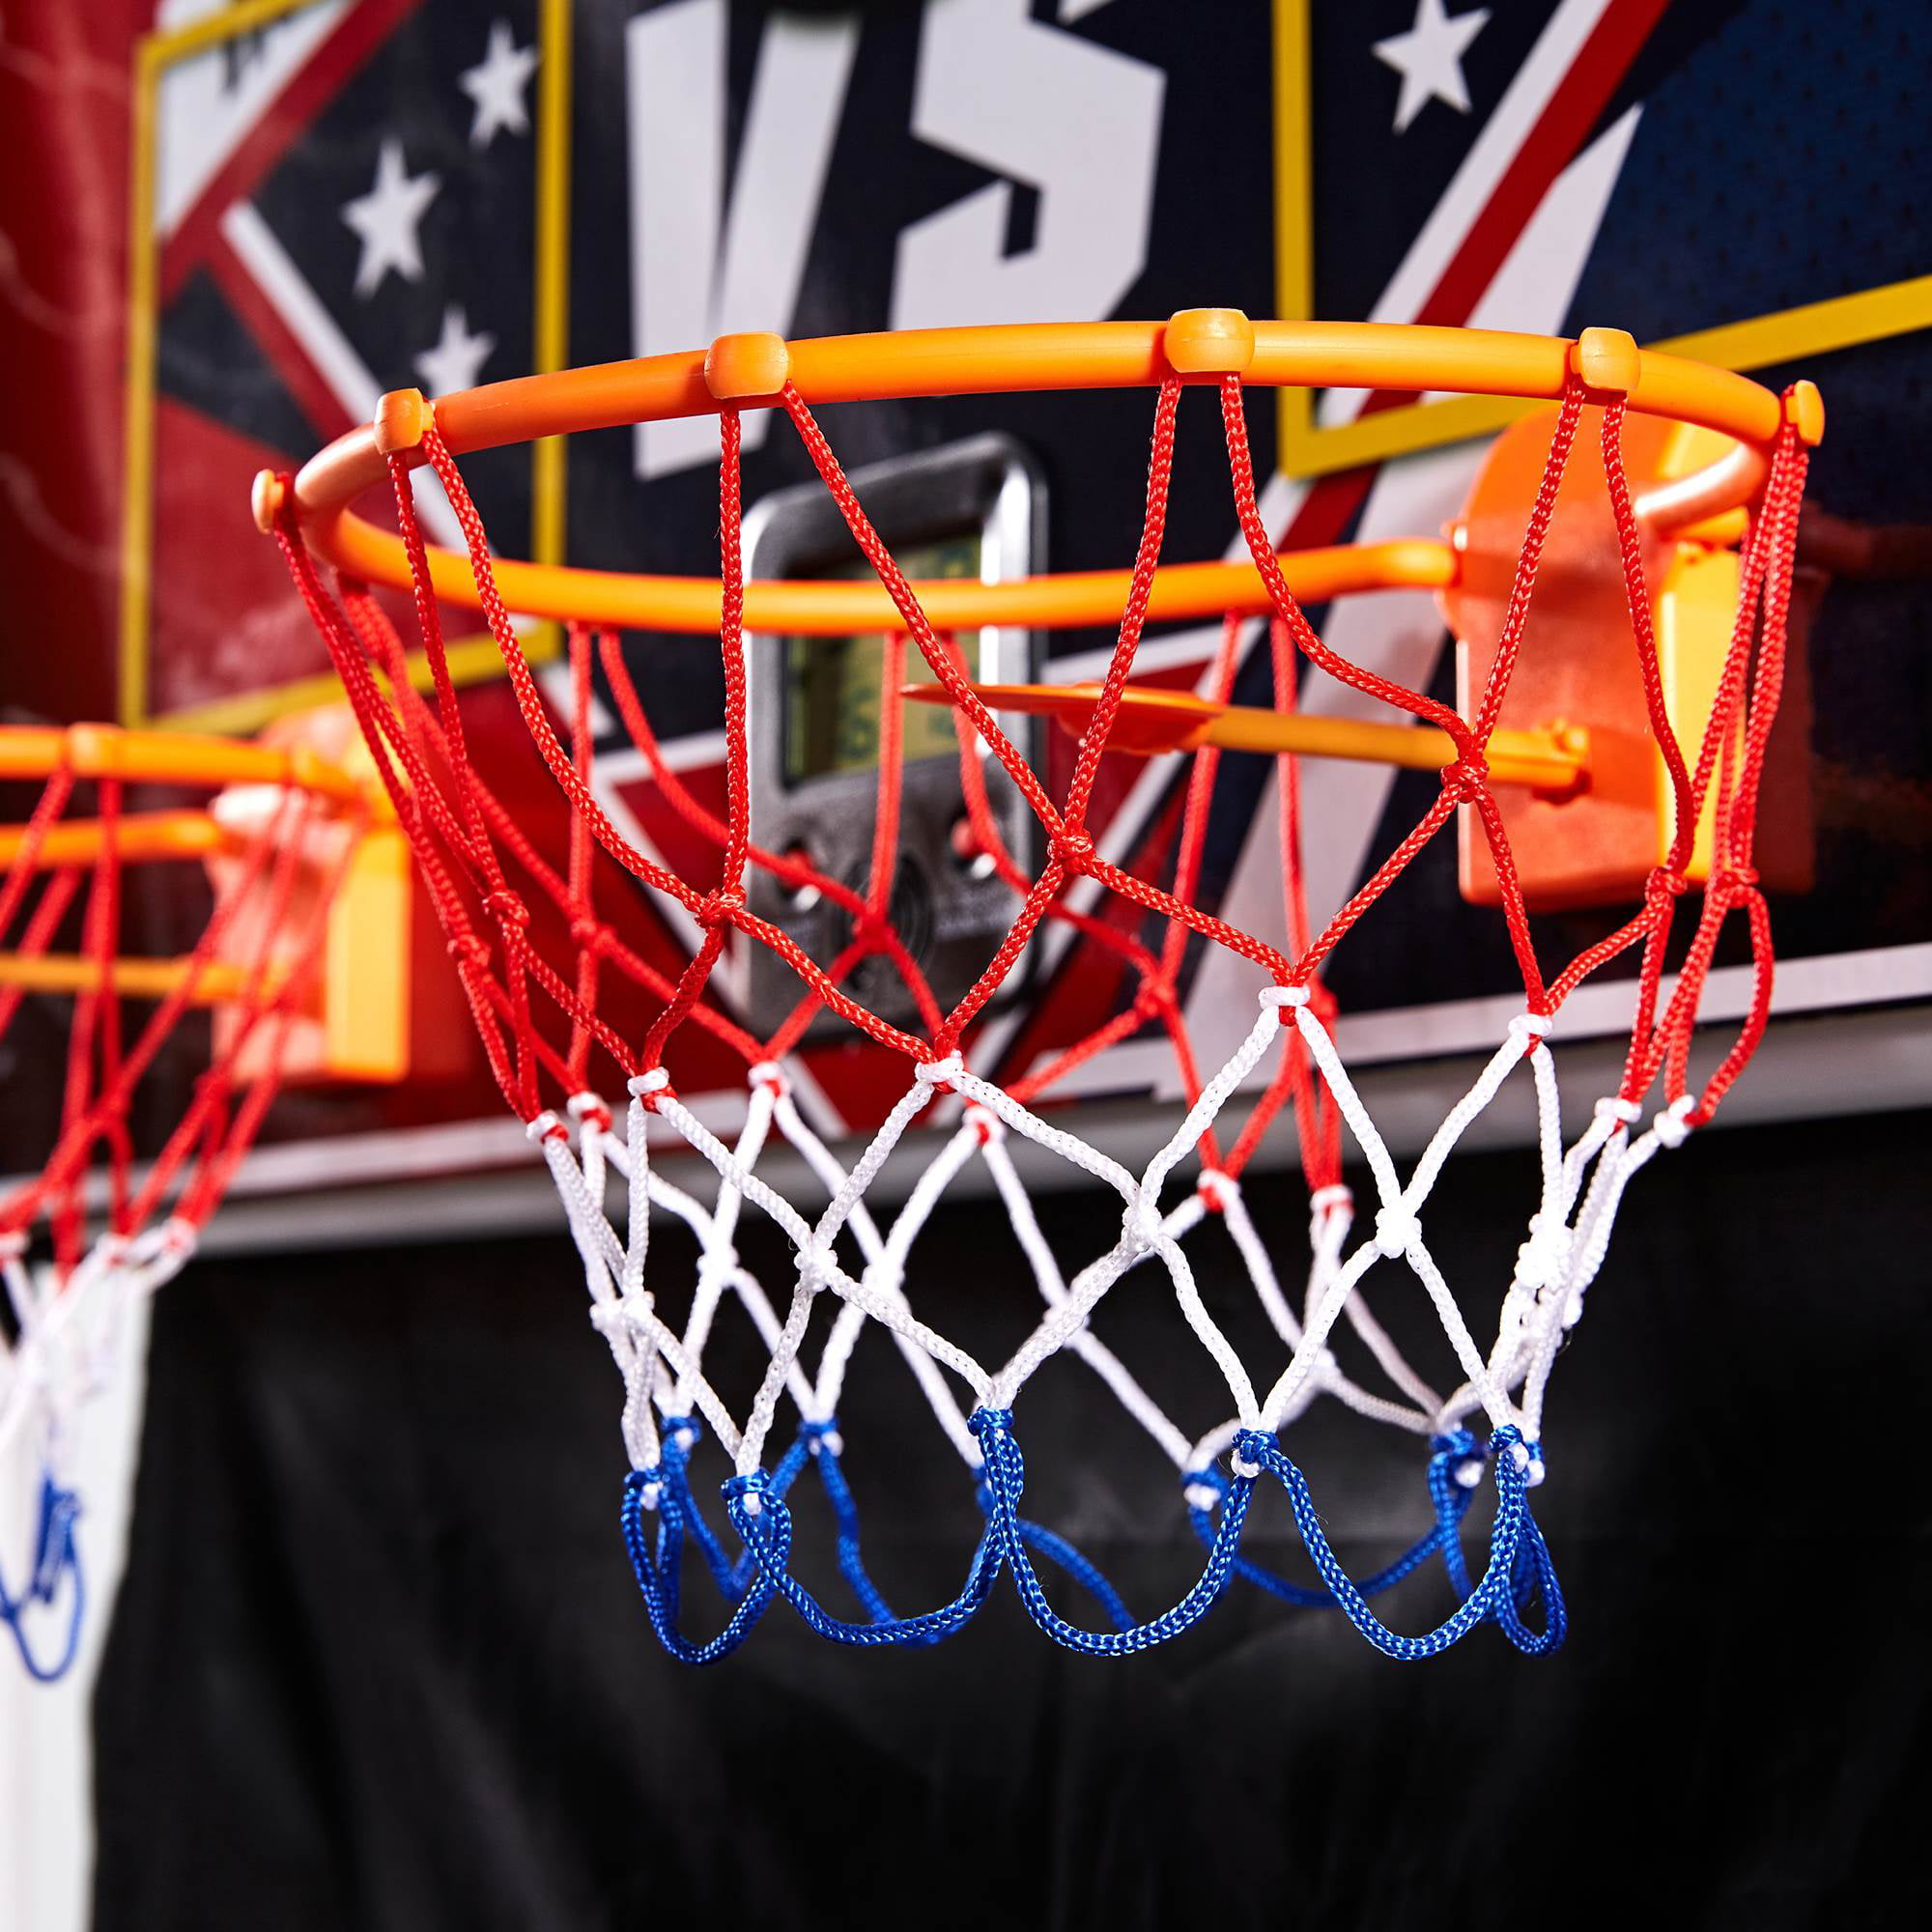 Lancaster Gaming Company Electric Indoor Basketball Game in the